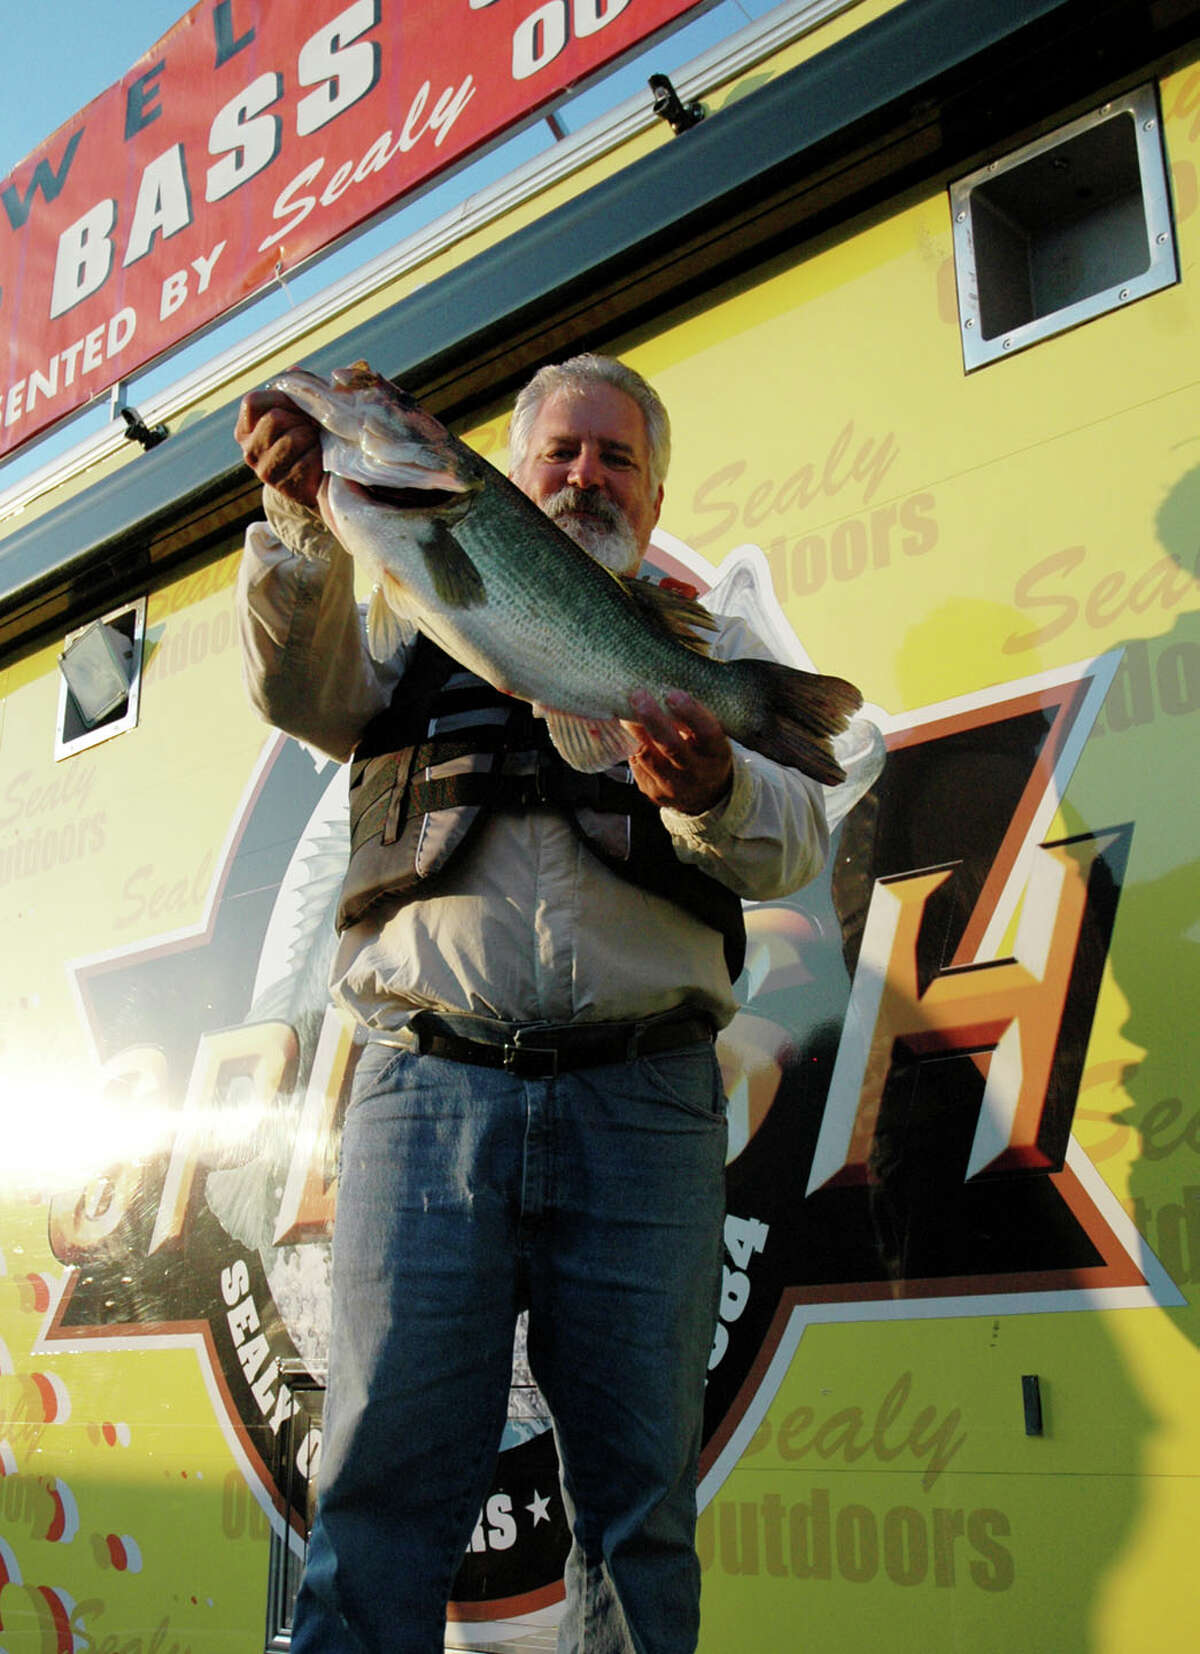 Alexandria LA angler David Jones set the bar to beat during the first hourly weigh in with his 8.51 lb bass. He stayed in top spot until the 12-1:00 hour, then fell to a 2nd place position photo by Patty Lenderman / Lakecaster